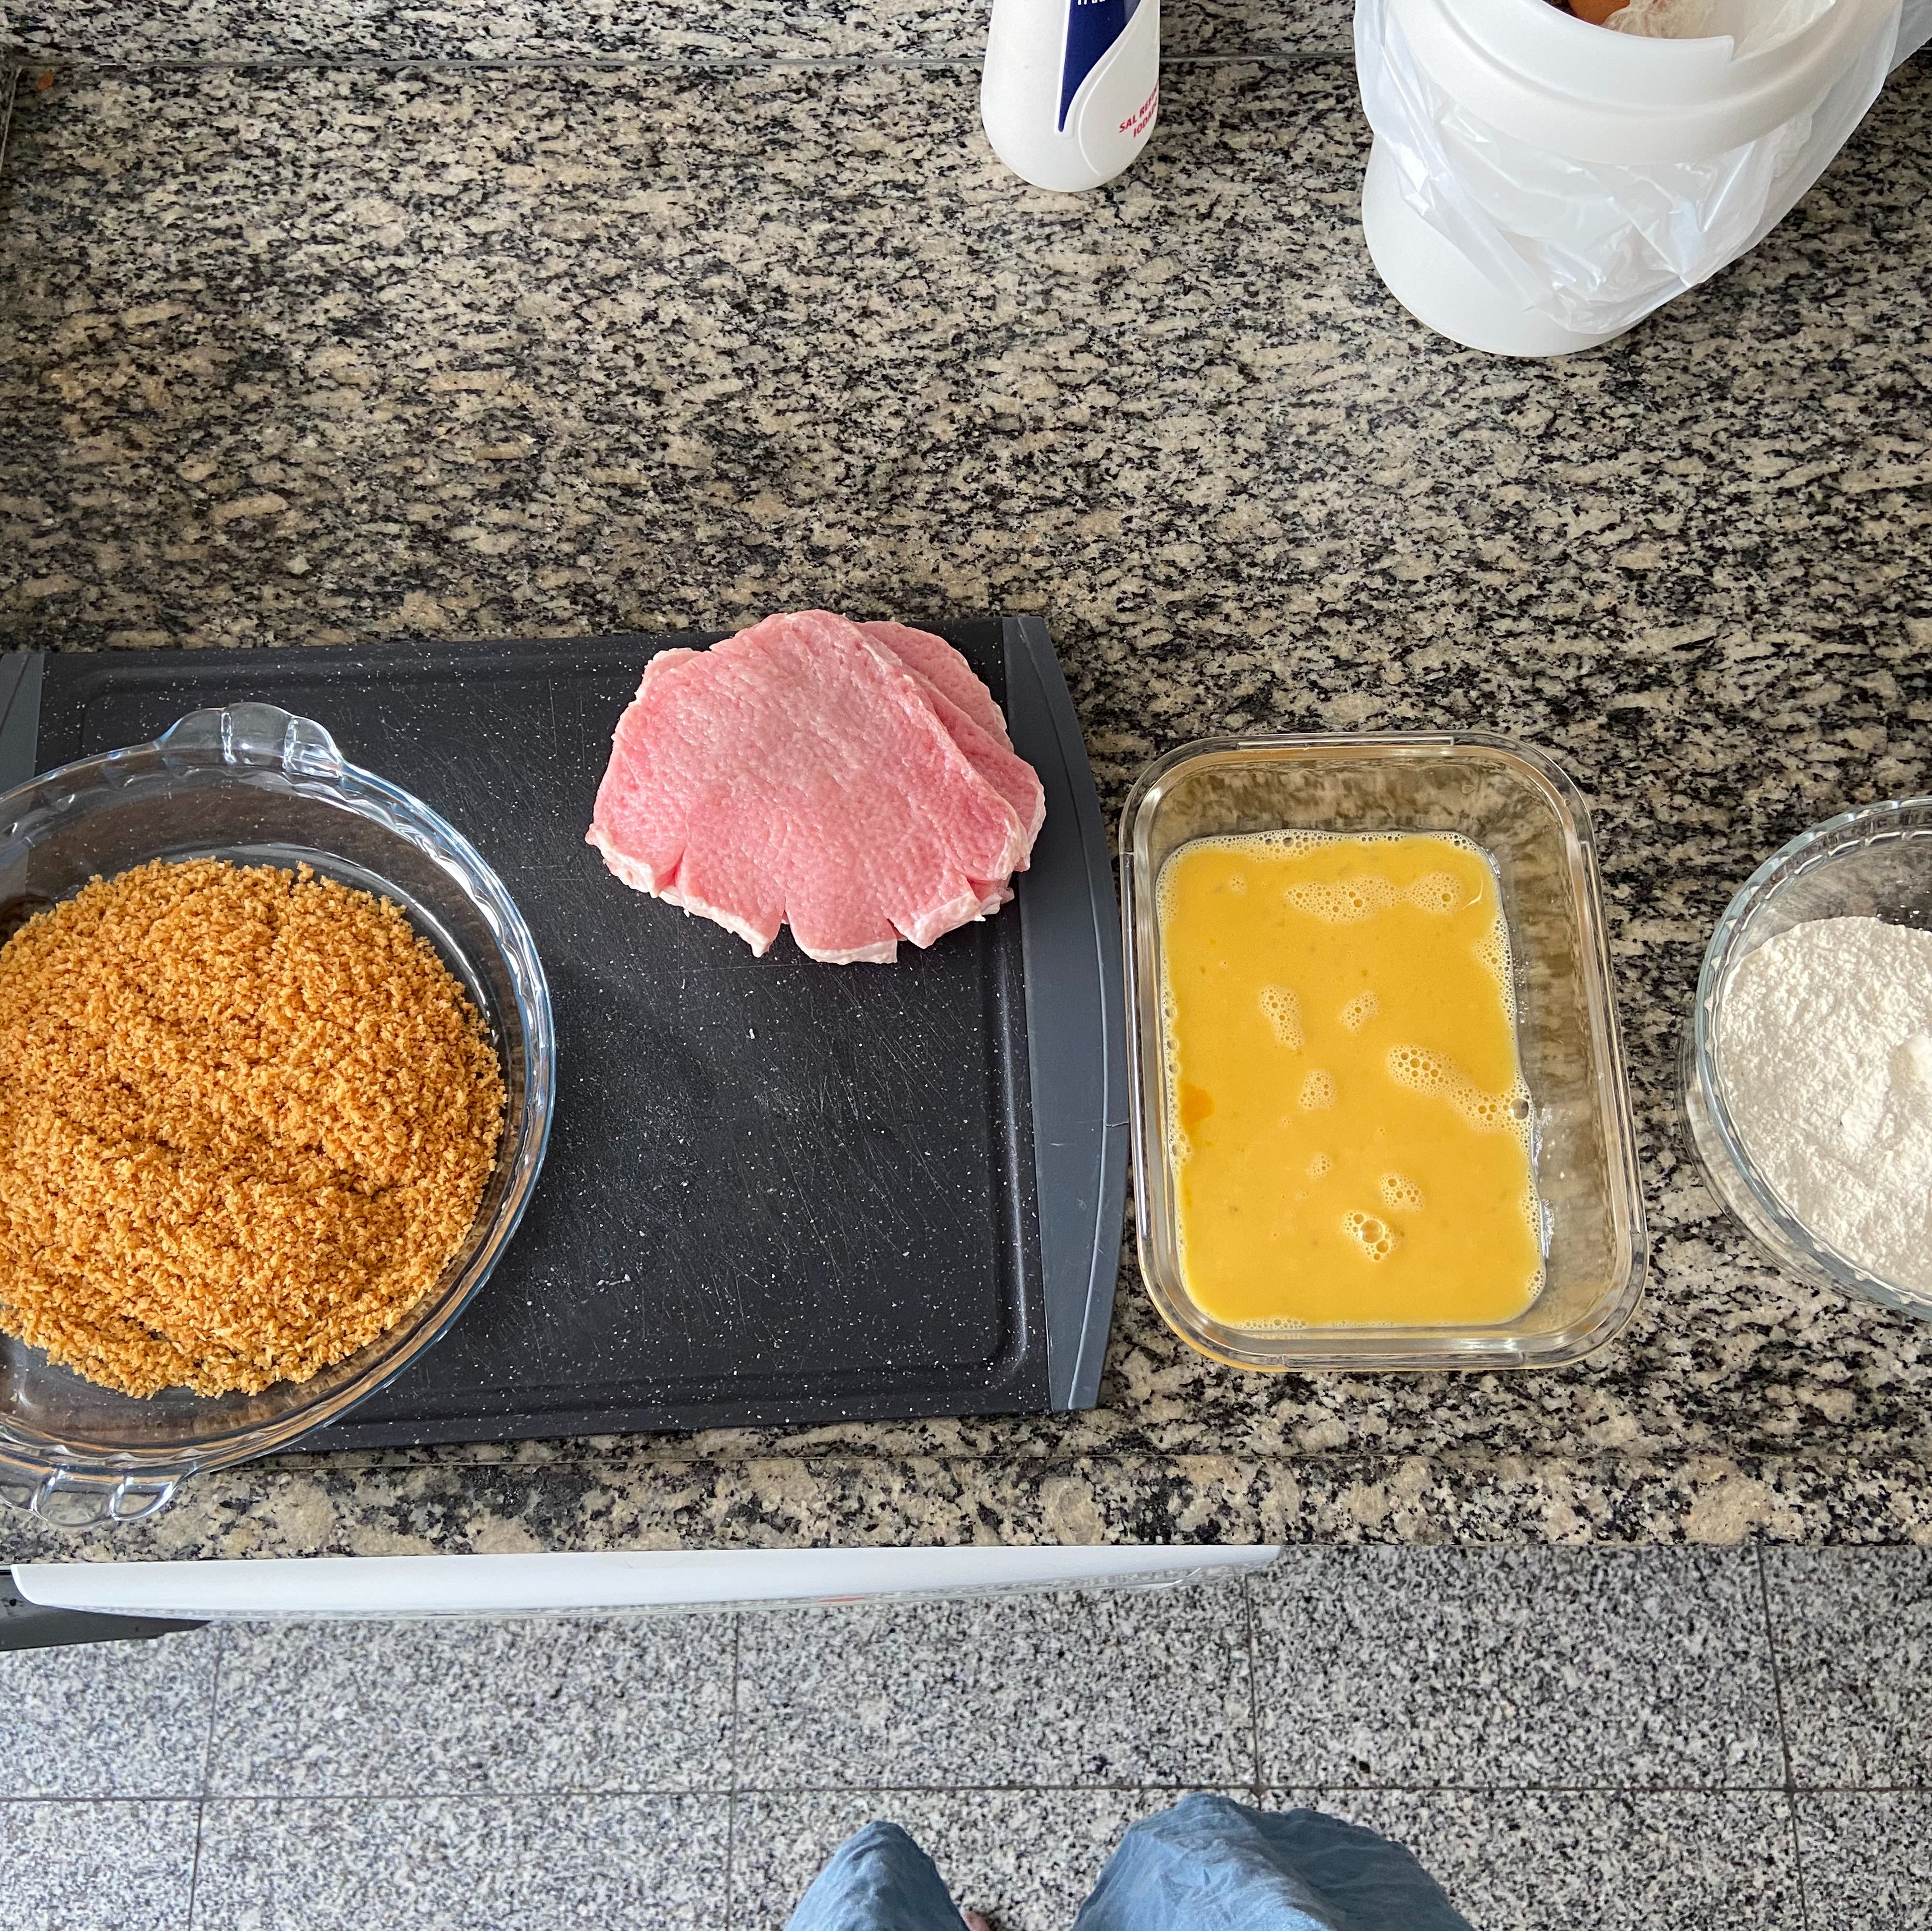 Combine the flour, salt and pepper in a dish. Whisk the eggs in another dish and have your toasted panko breadcrumbs ready. This is the order of breading: flour, egg, panko.